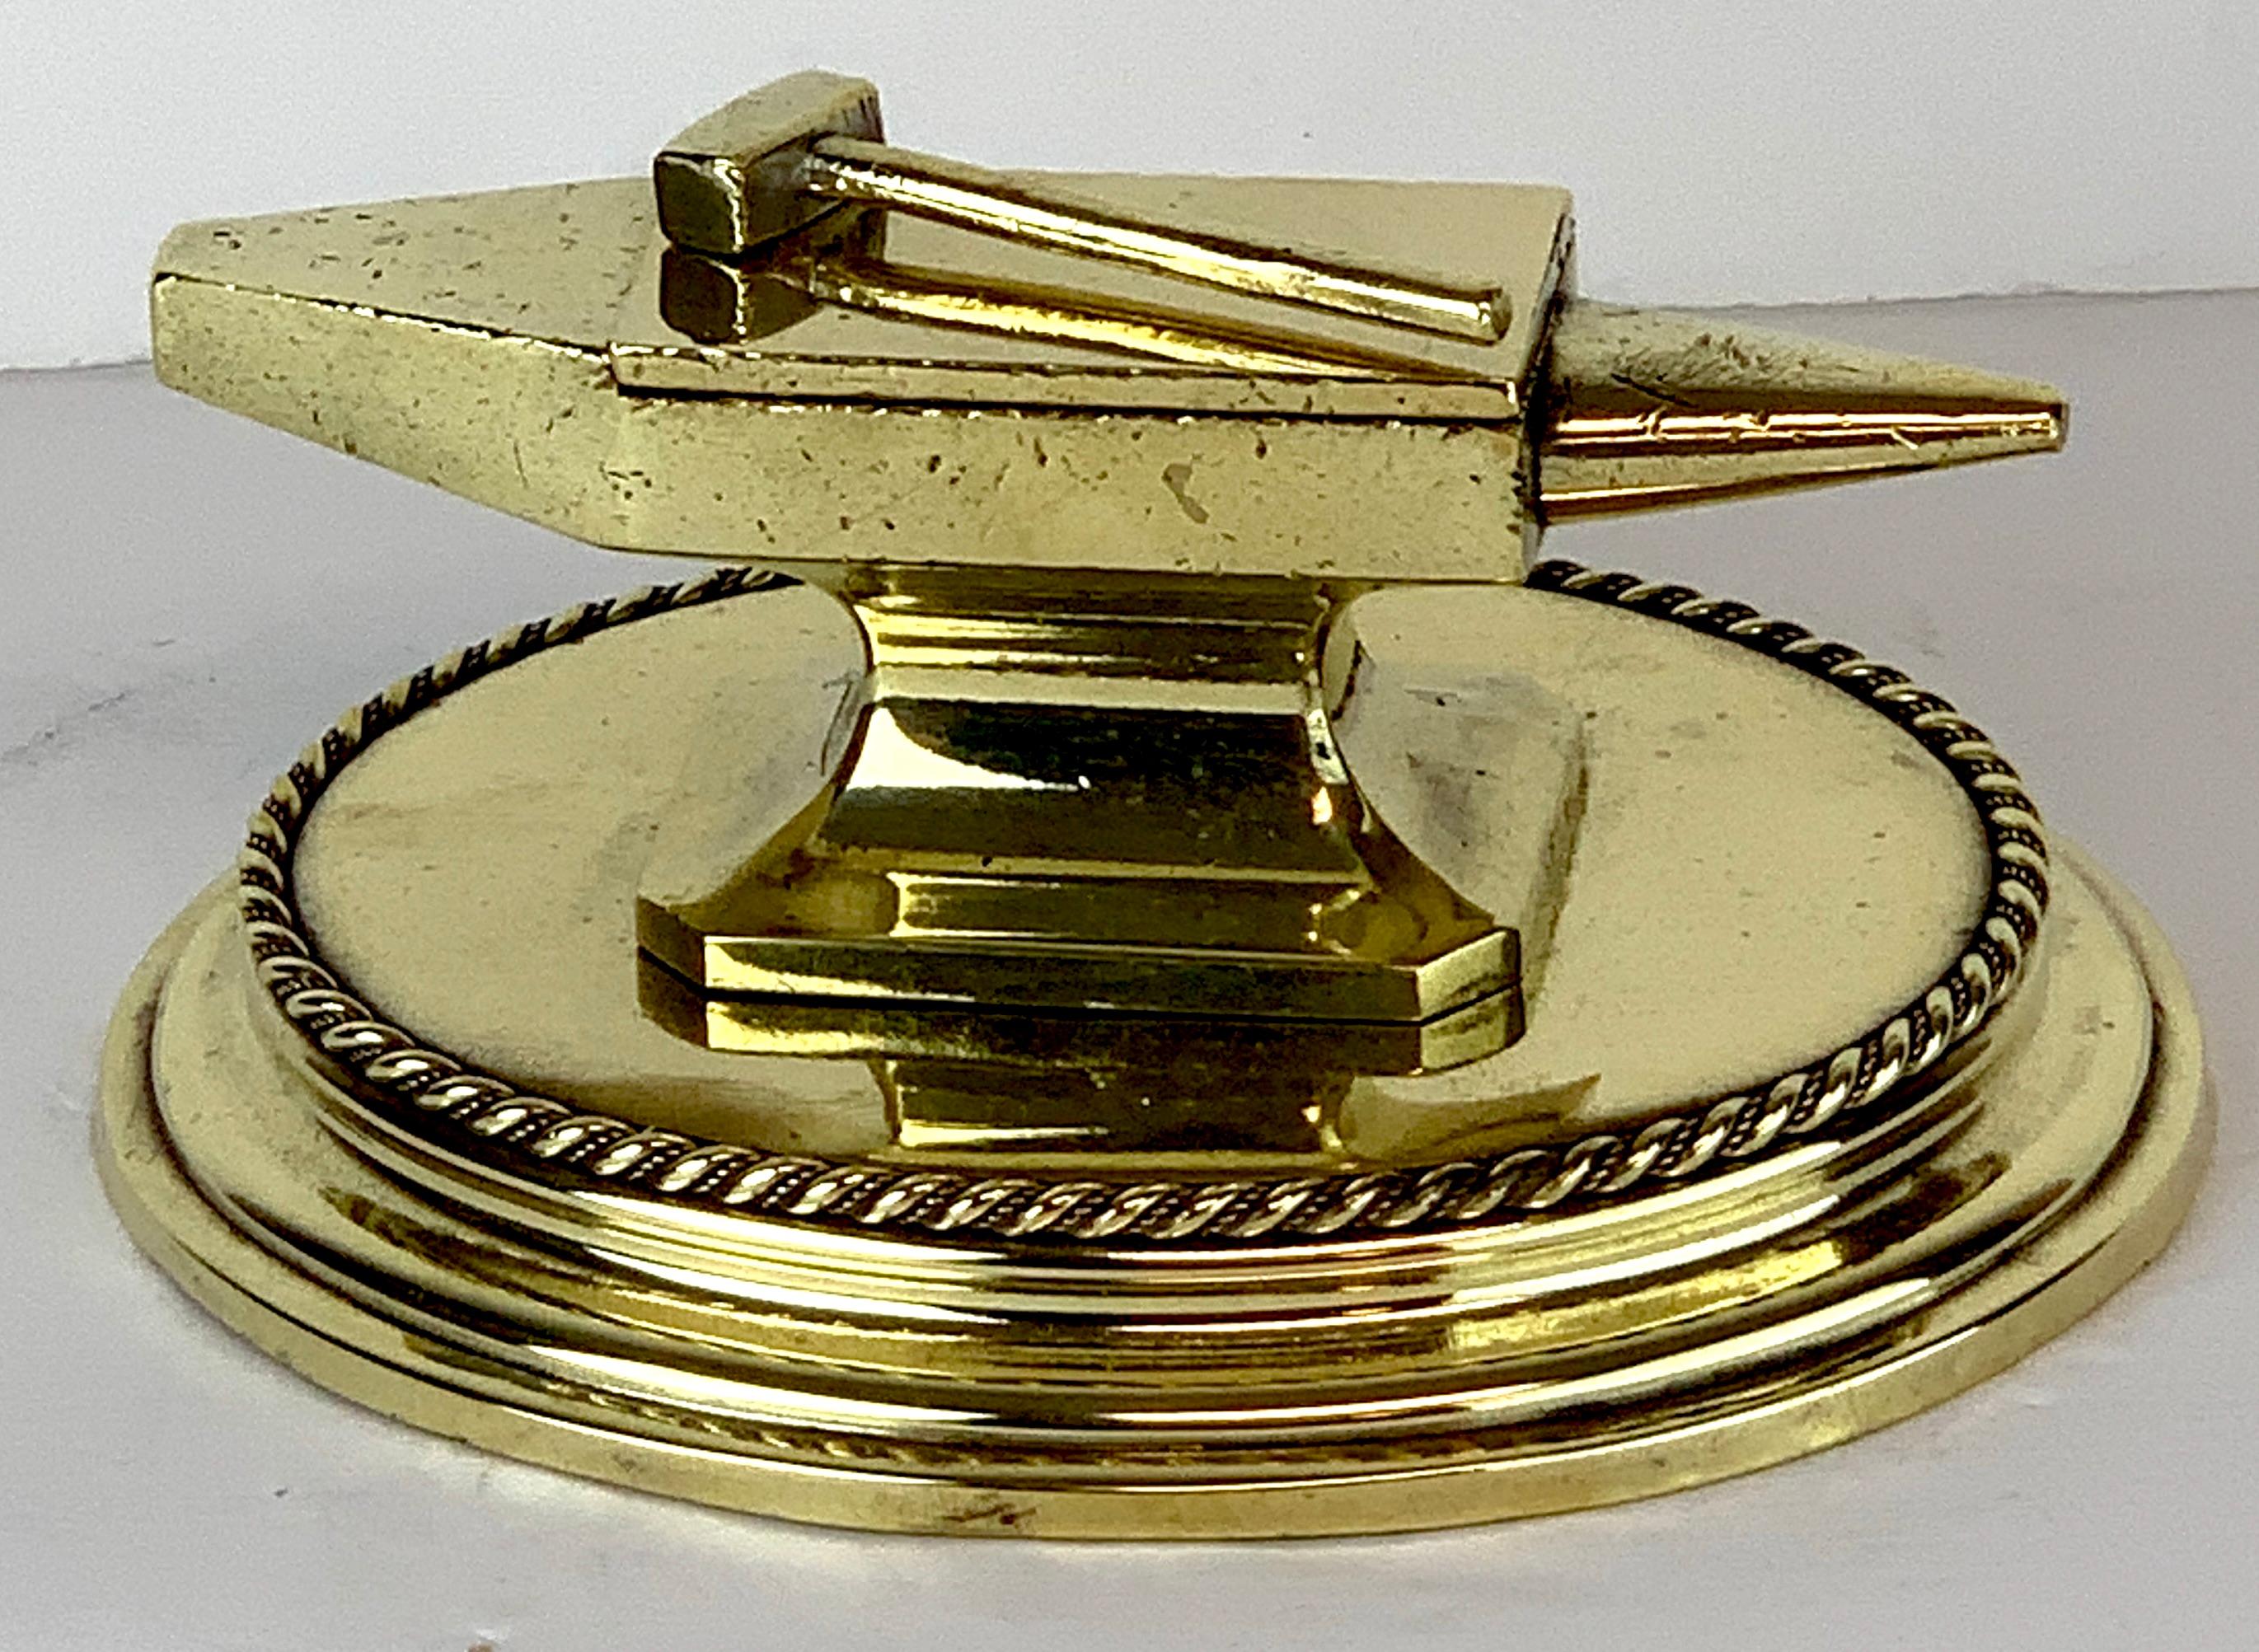 Antique English Brass Anvil Matchstrike, Realistically cast and modeled, as an anvil, with lift top revealing the match caddy and strike on the lid, resting on a rope edge oval base. Professionally polished, ready to place.